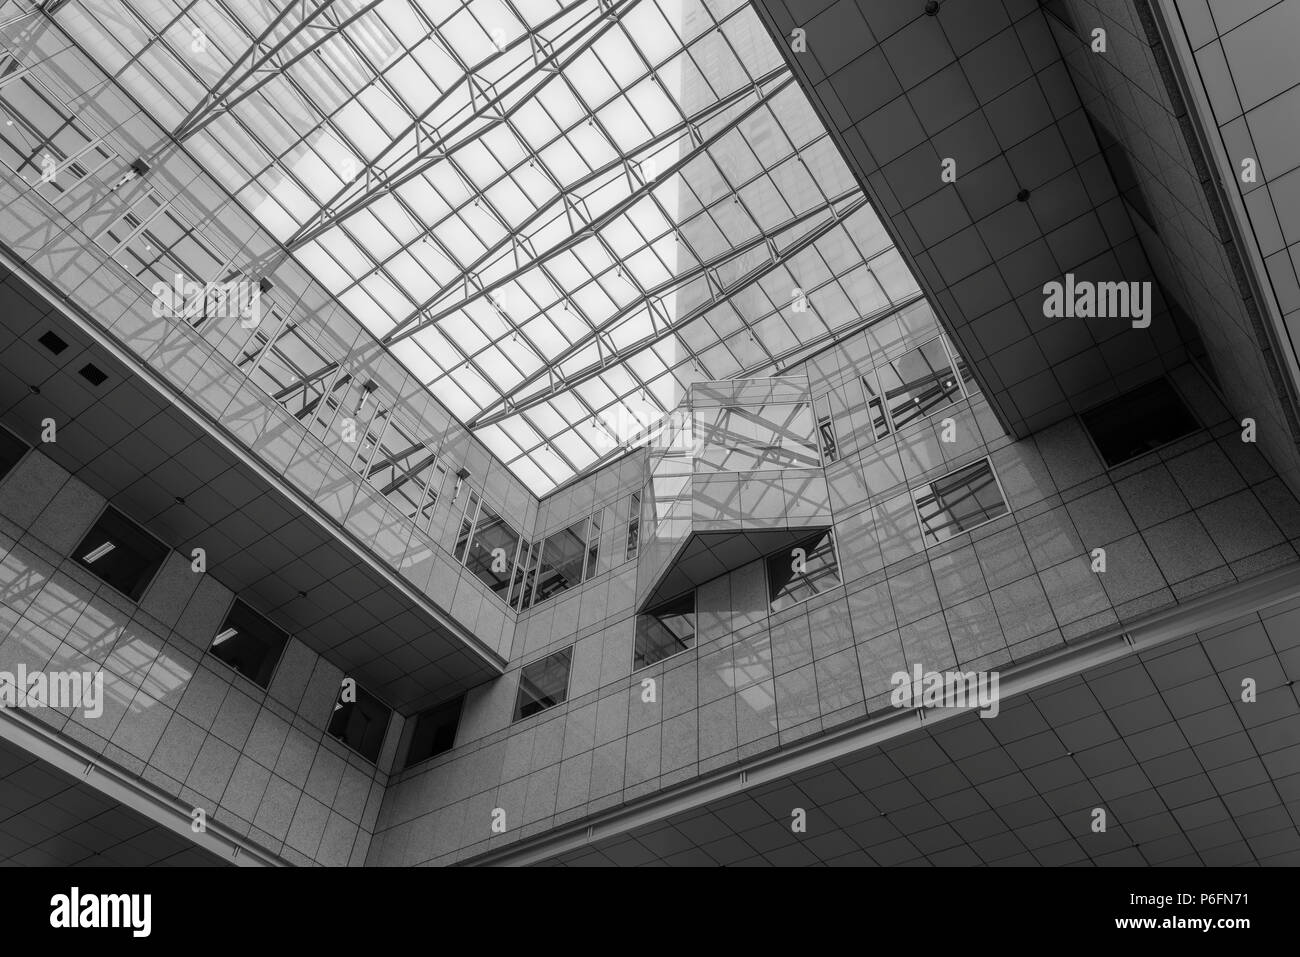 Singapore - June 30. 2018: Singapore bank building from inside looking ...